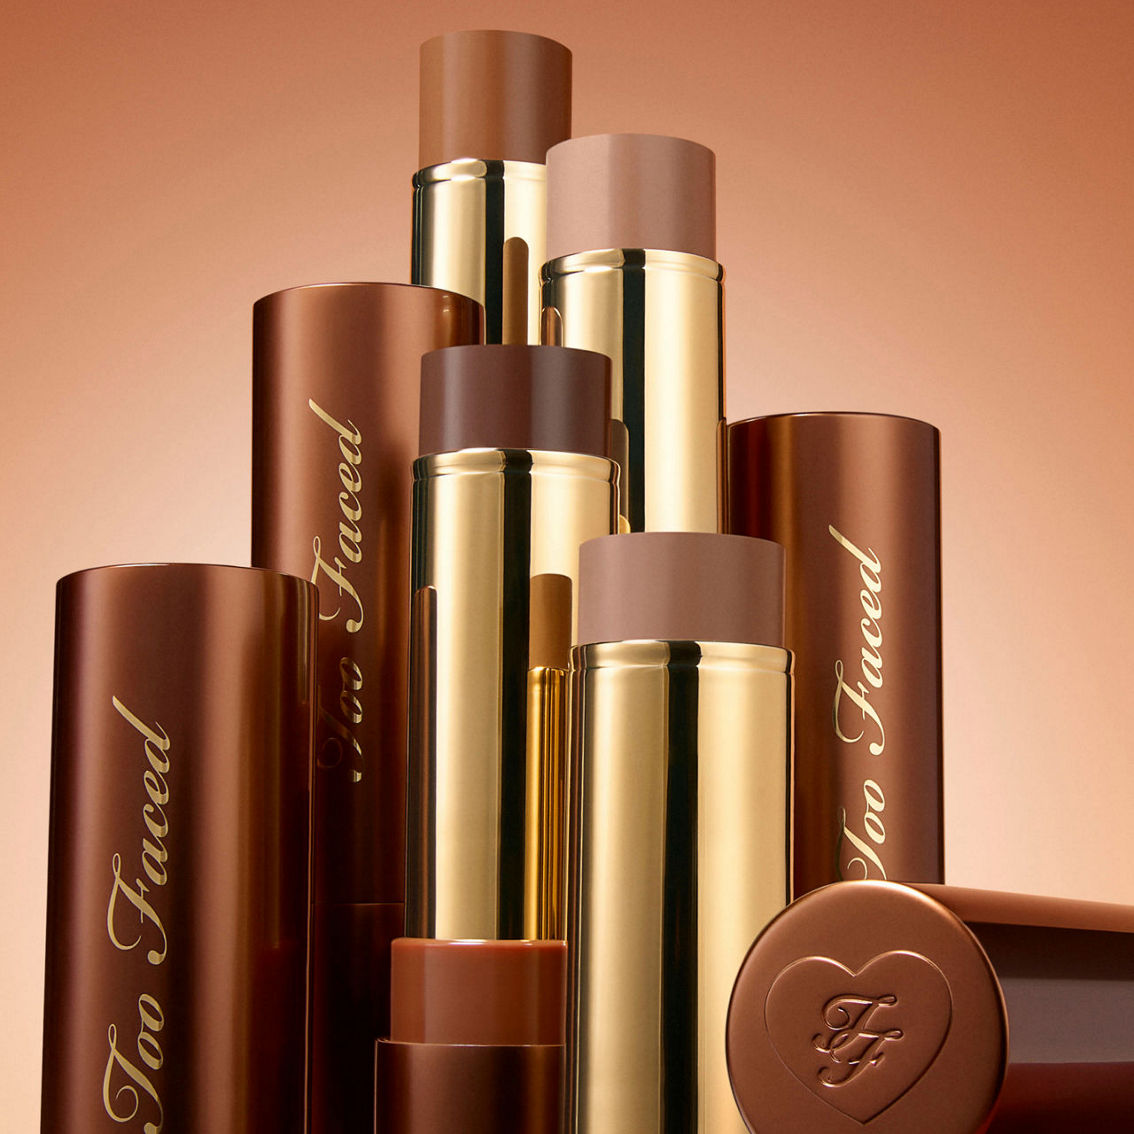 Too Faced Chocolate Soleil Sun and Done Bronzing Stick - Image 7 of 7